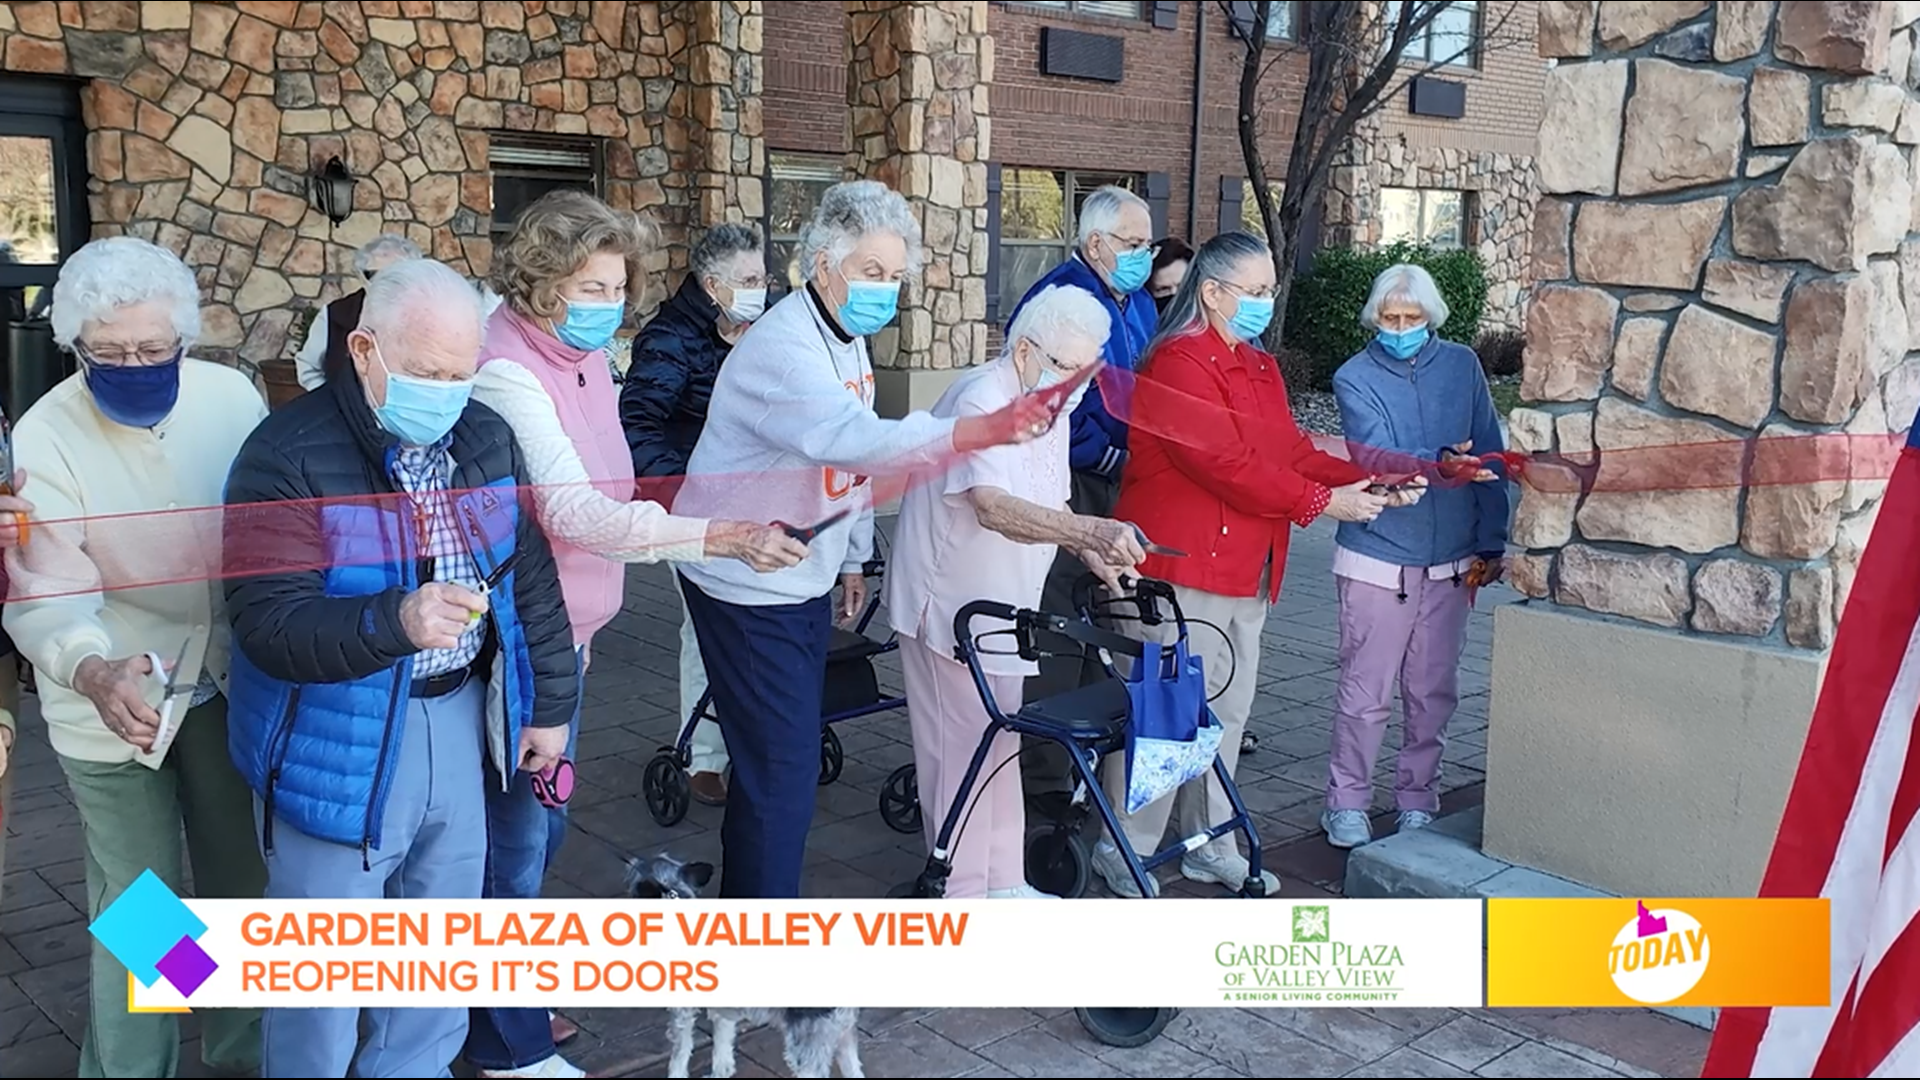 Garden Plaza at Valley View has recently reopened their doors, Shannon Skidmore shares with us the joyous occasion.